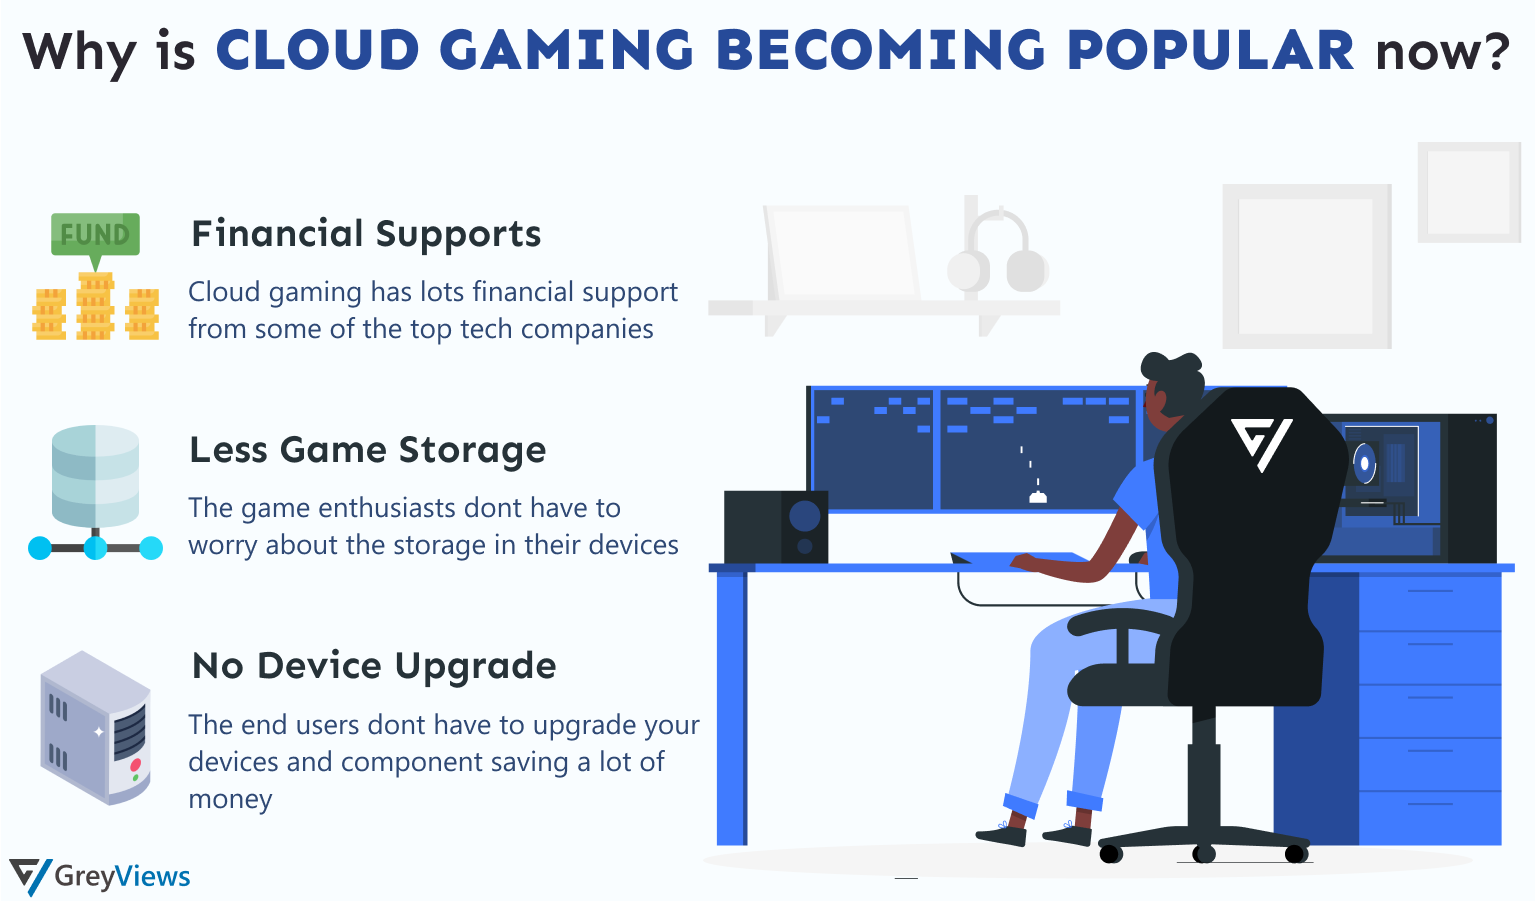 Web-based Cloud Gaming Solutions: The Case of Boosteroid